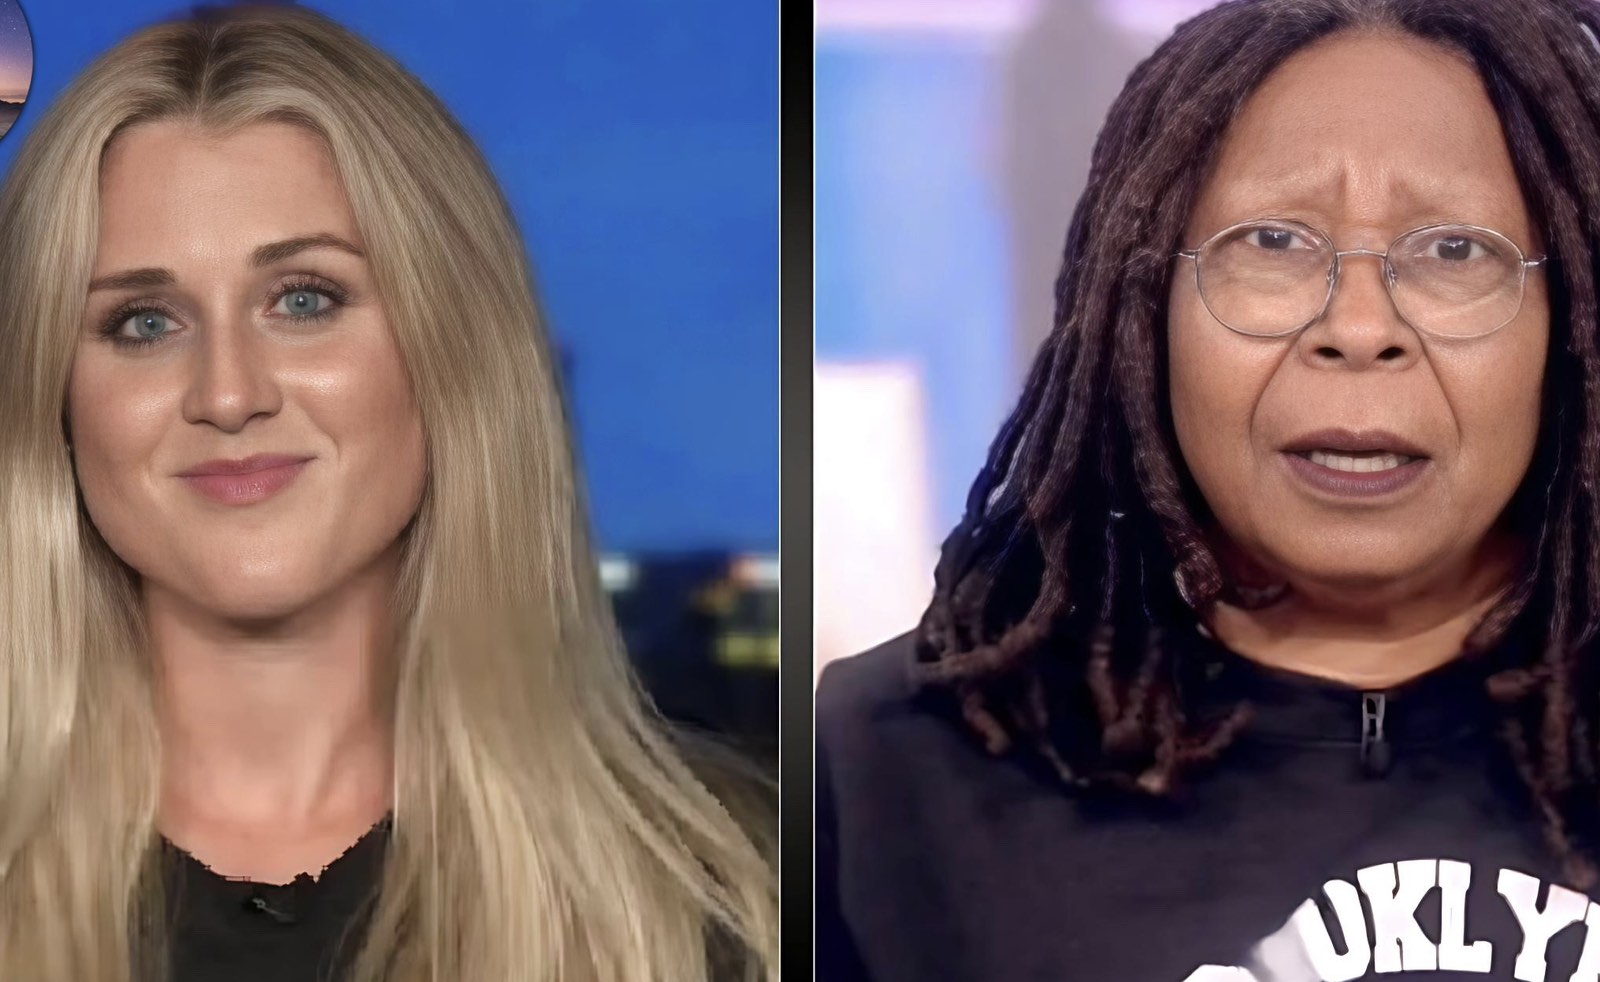 Riley Gaines Criticizes Whoopi Goldberg on The View: “You’re a Disgrace to Real Women”